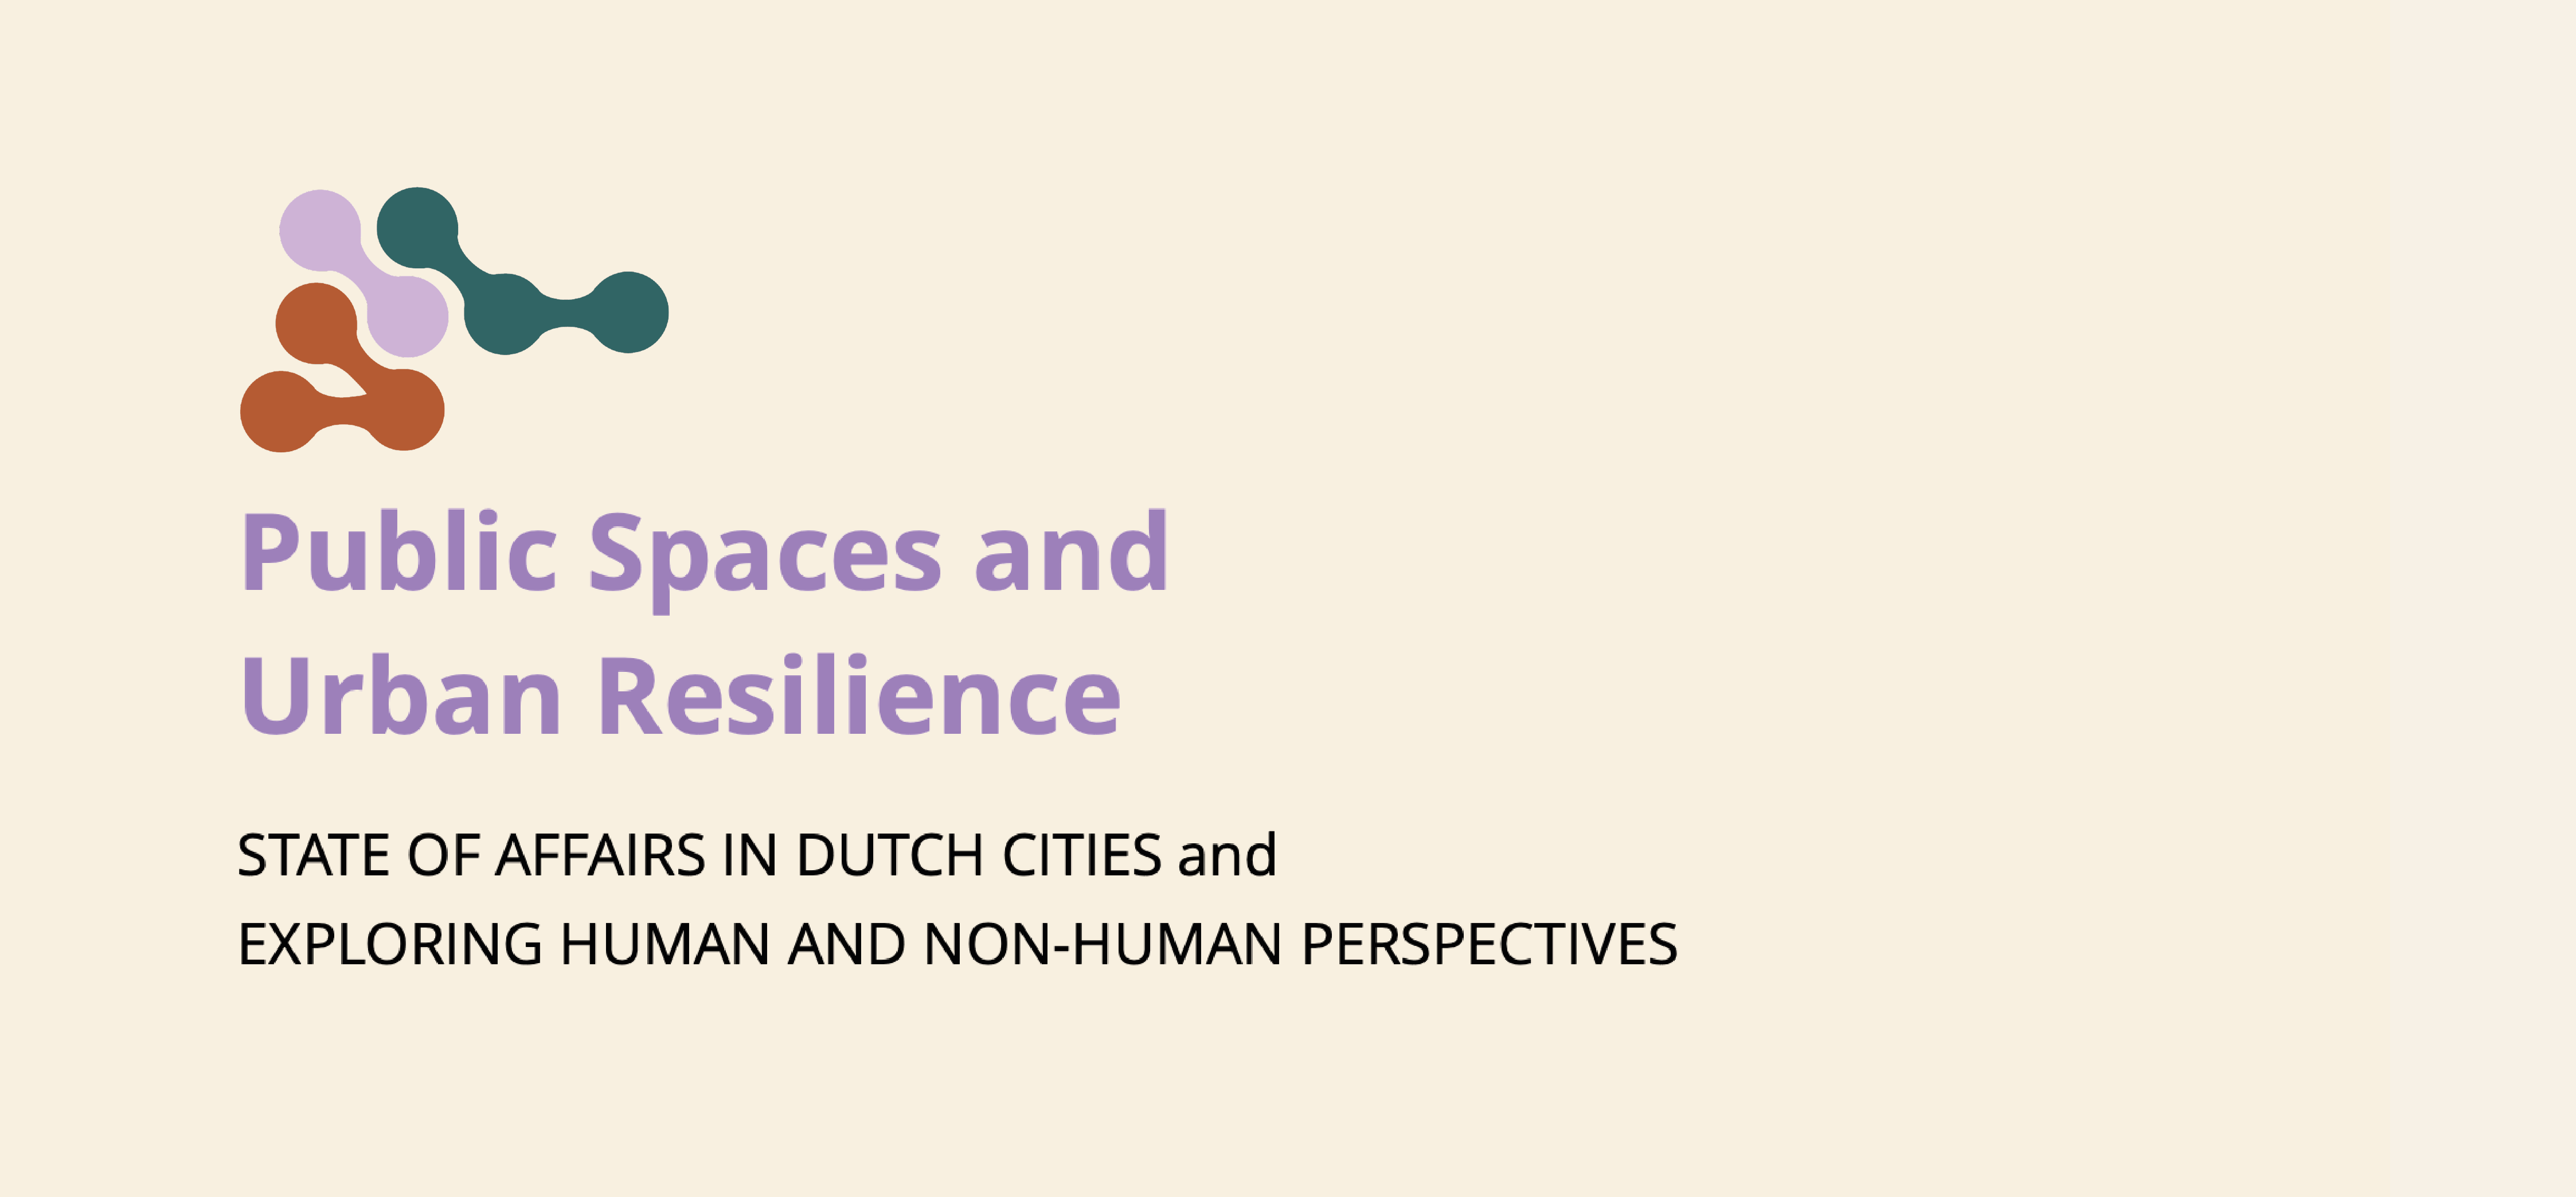 Public Spaces and Urban Resilience: state of affairs in Dutch cities and exploring human and non-human perspectives